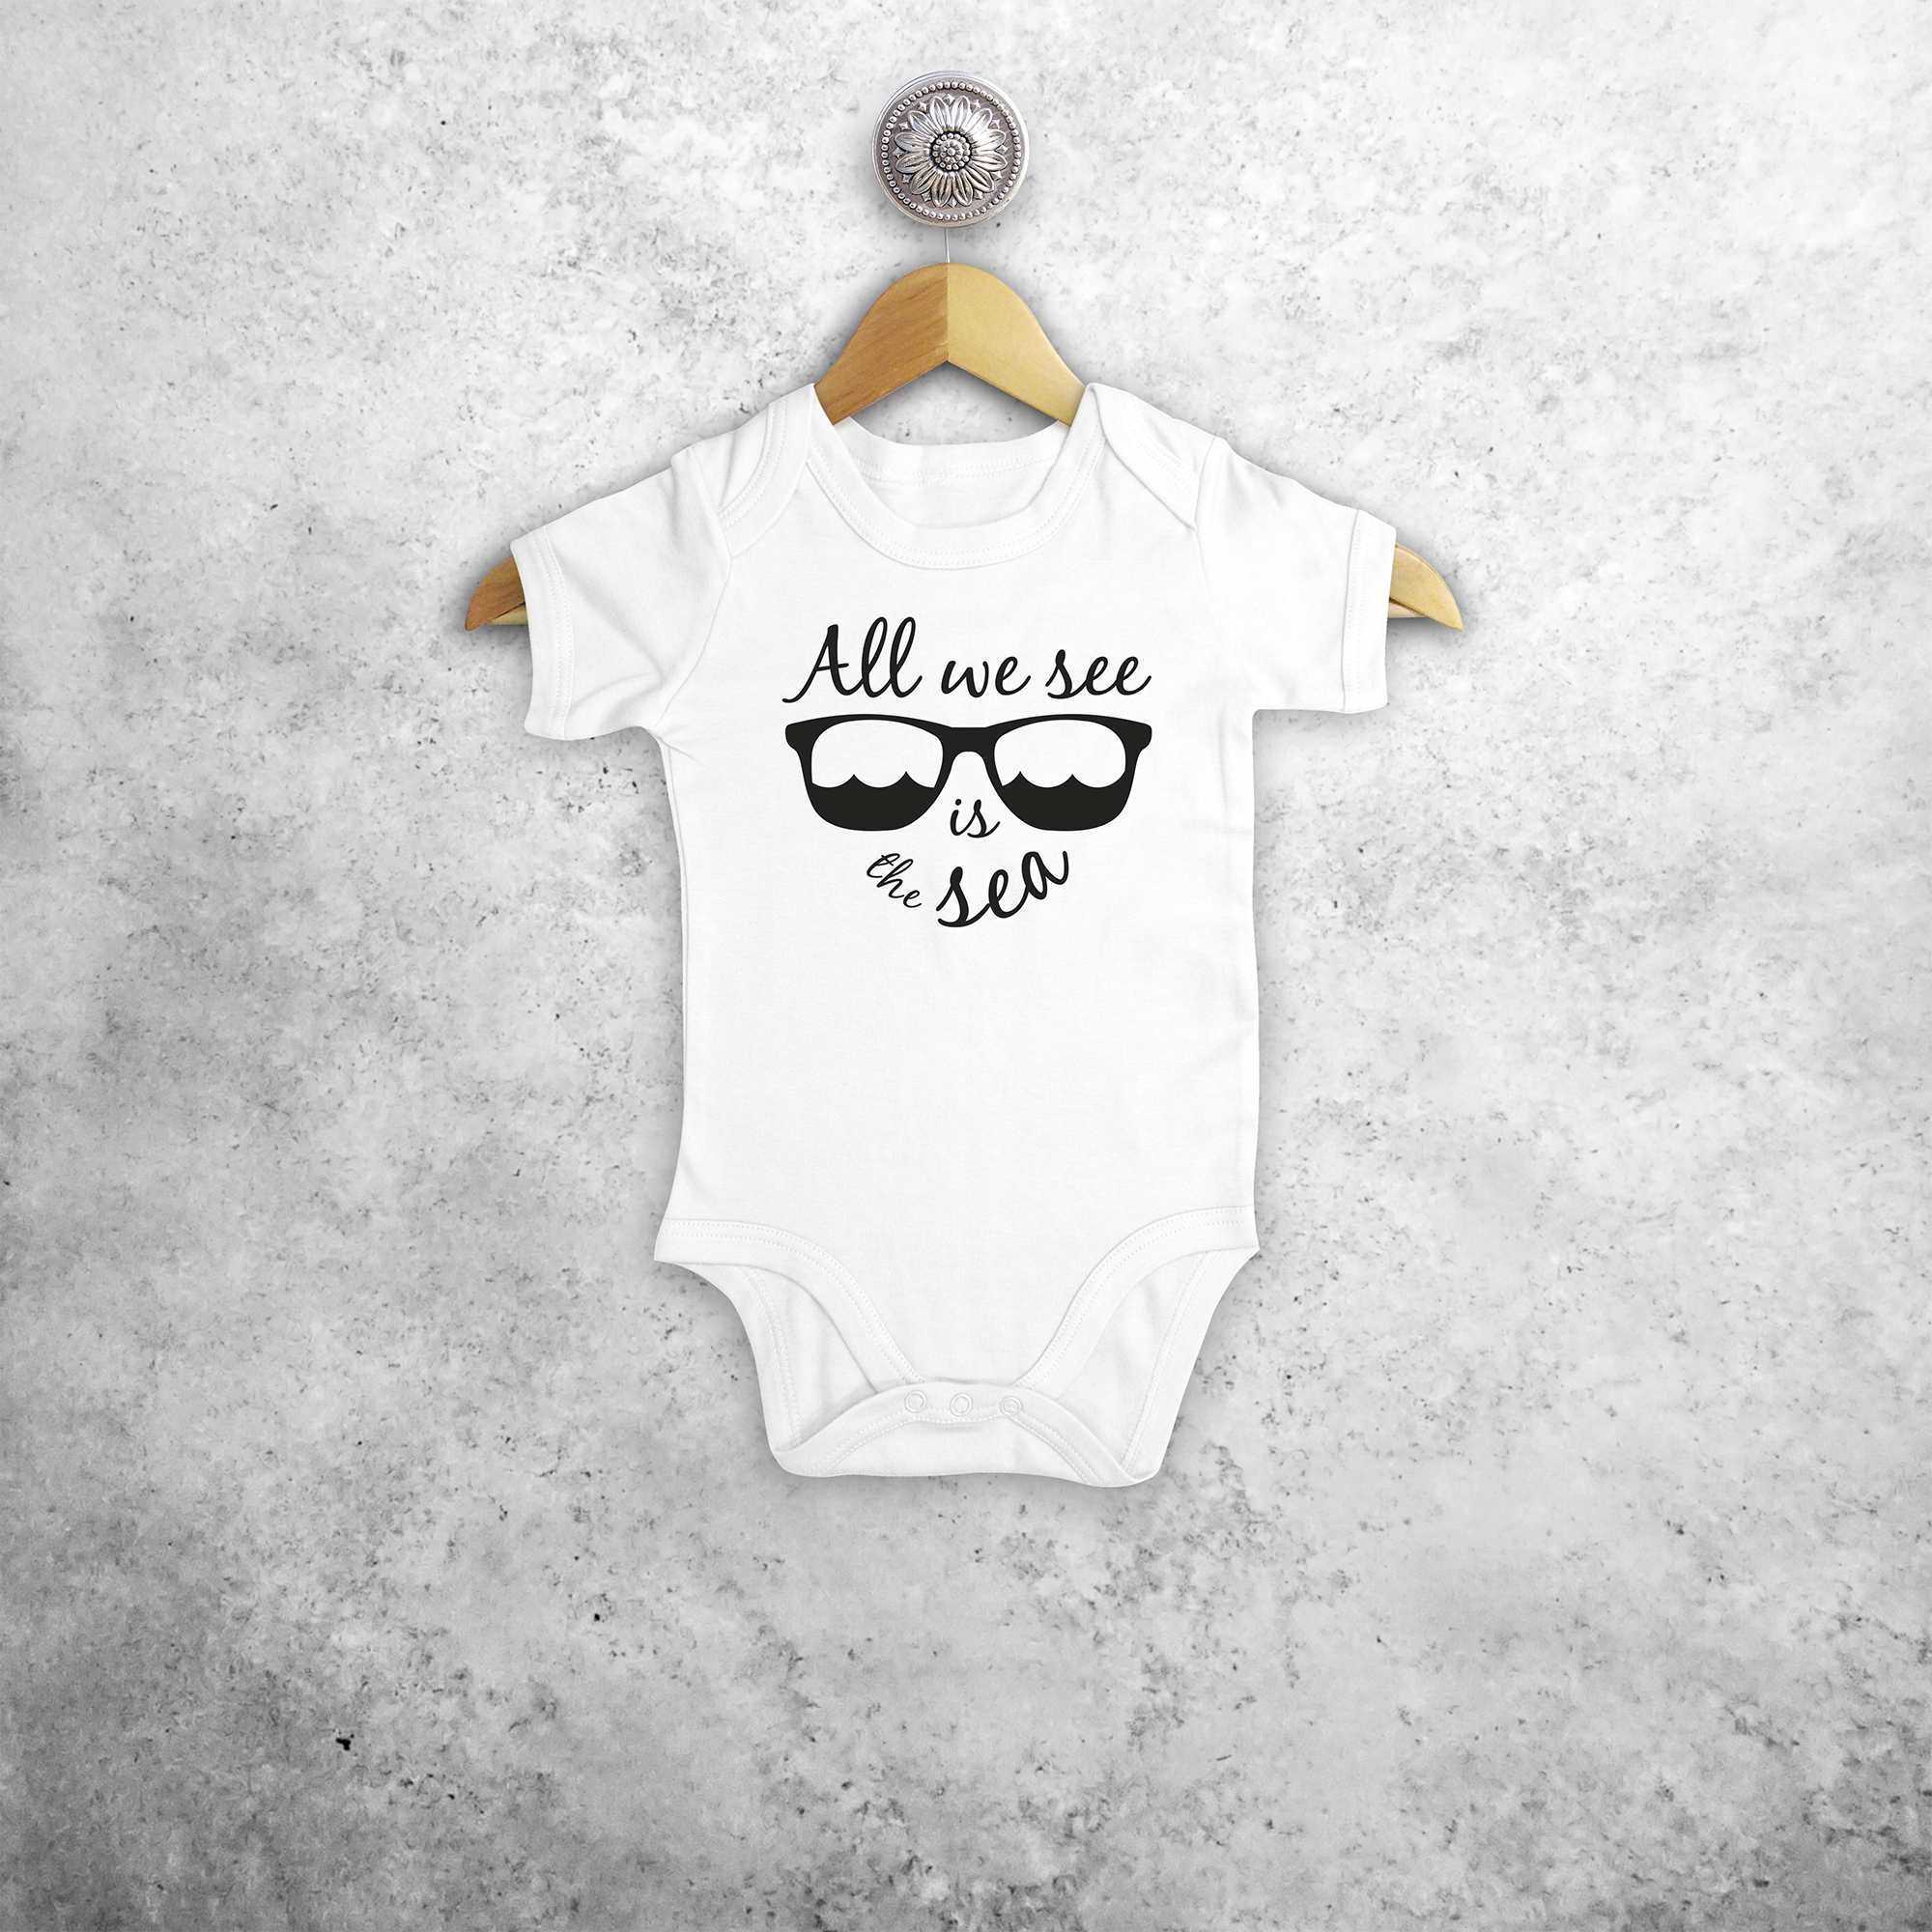 'All we see is the sea' baby shortsleeve bodysuit